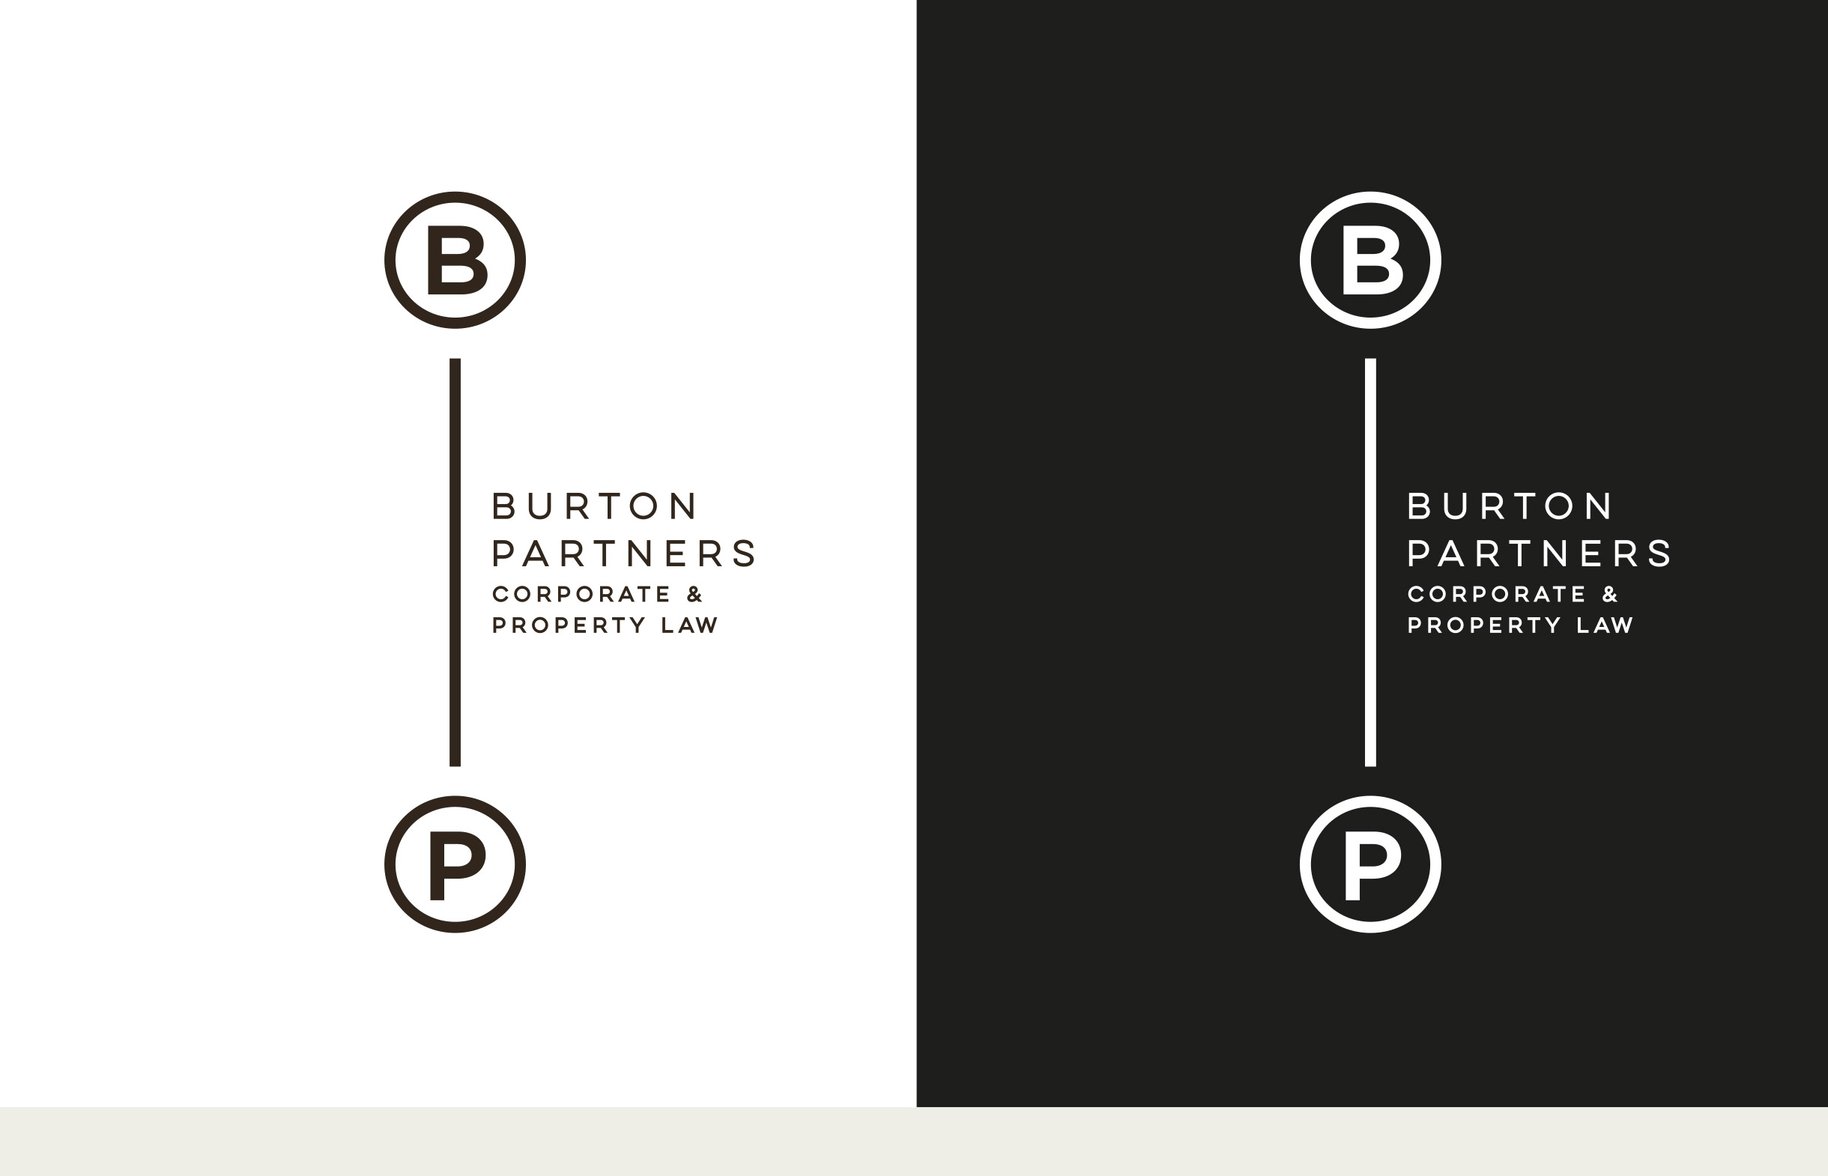 Burton Partners Corporate and Property Law logo black and white